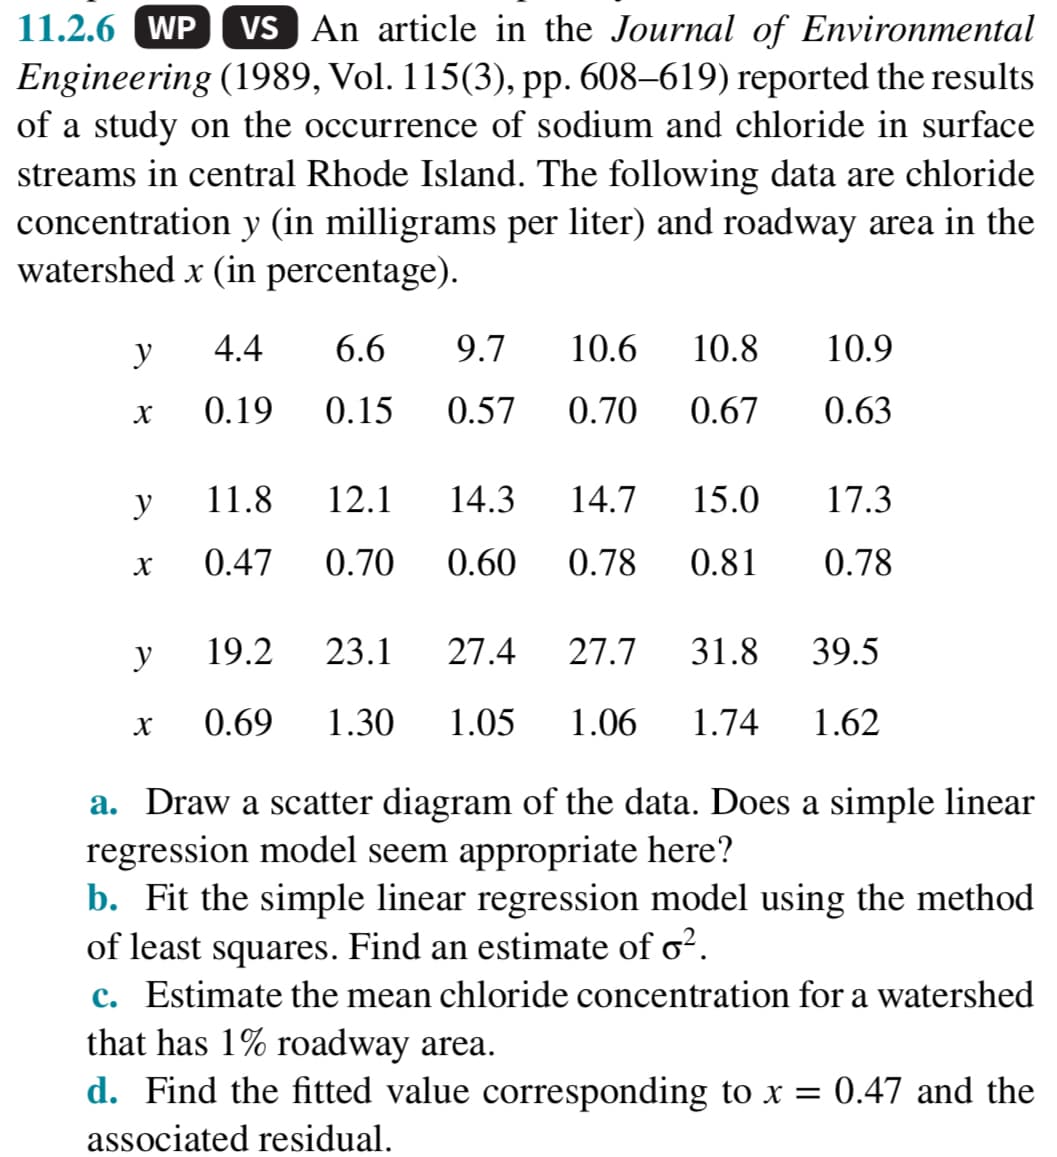 11.2.6 WP VS An article in the Journal of Environmental
Engineering (1989, Vol. 115(3), pp. 608–619) reported the results
of a study on the occurrence of sodium and chloride in surface
streams in central Rhode Island. The following data are chloride
concentration y (in milligrams per liter) and roadway area in the
watershed x (in percentage).
y
X
y
X
y
X
4.4
6.6
0.19 0.15 0.57 0.70
9.7 10.6 10.8
0.67
11.8 12.1
0.47 0.70
14.3 14.7
0.60 0.78
15.0
0.81
19.2
23.1
27.4 27.7 31.8
0.69 1.30 1.05 1.06 1.74
10.9
0.63
17.3
0.78
39.5
1.62
a. Draw a scatter diagram of the data. Does a simple linear
regression model seem appropriate here?
b. Fit the simple linear regression model using the method
of least squares. Find an estimate of o².
c. Estimate the mean chloride concentration for a watershed
that has 1% roadway area.
d. Find the fitted value corresponding to x = 0.47 and the
associated residual.